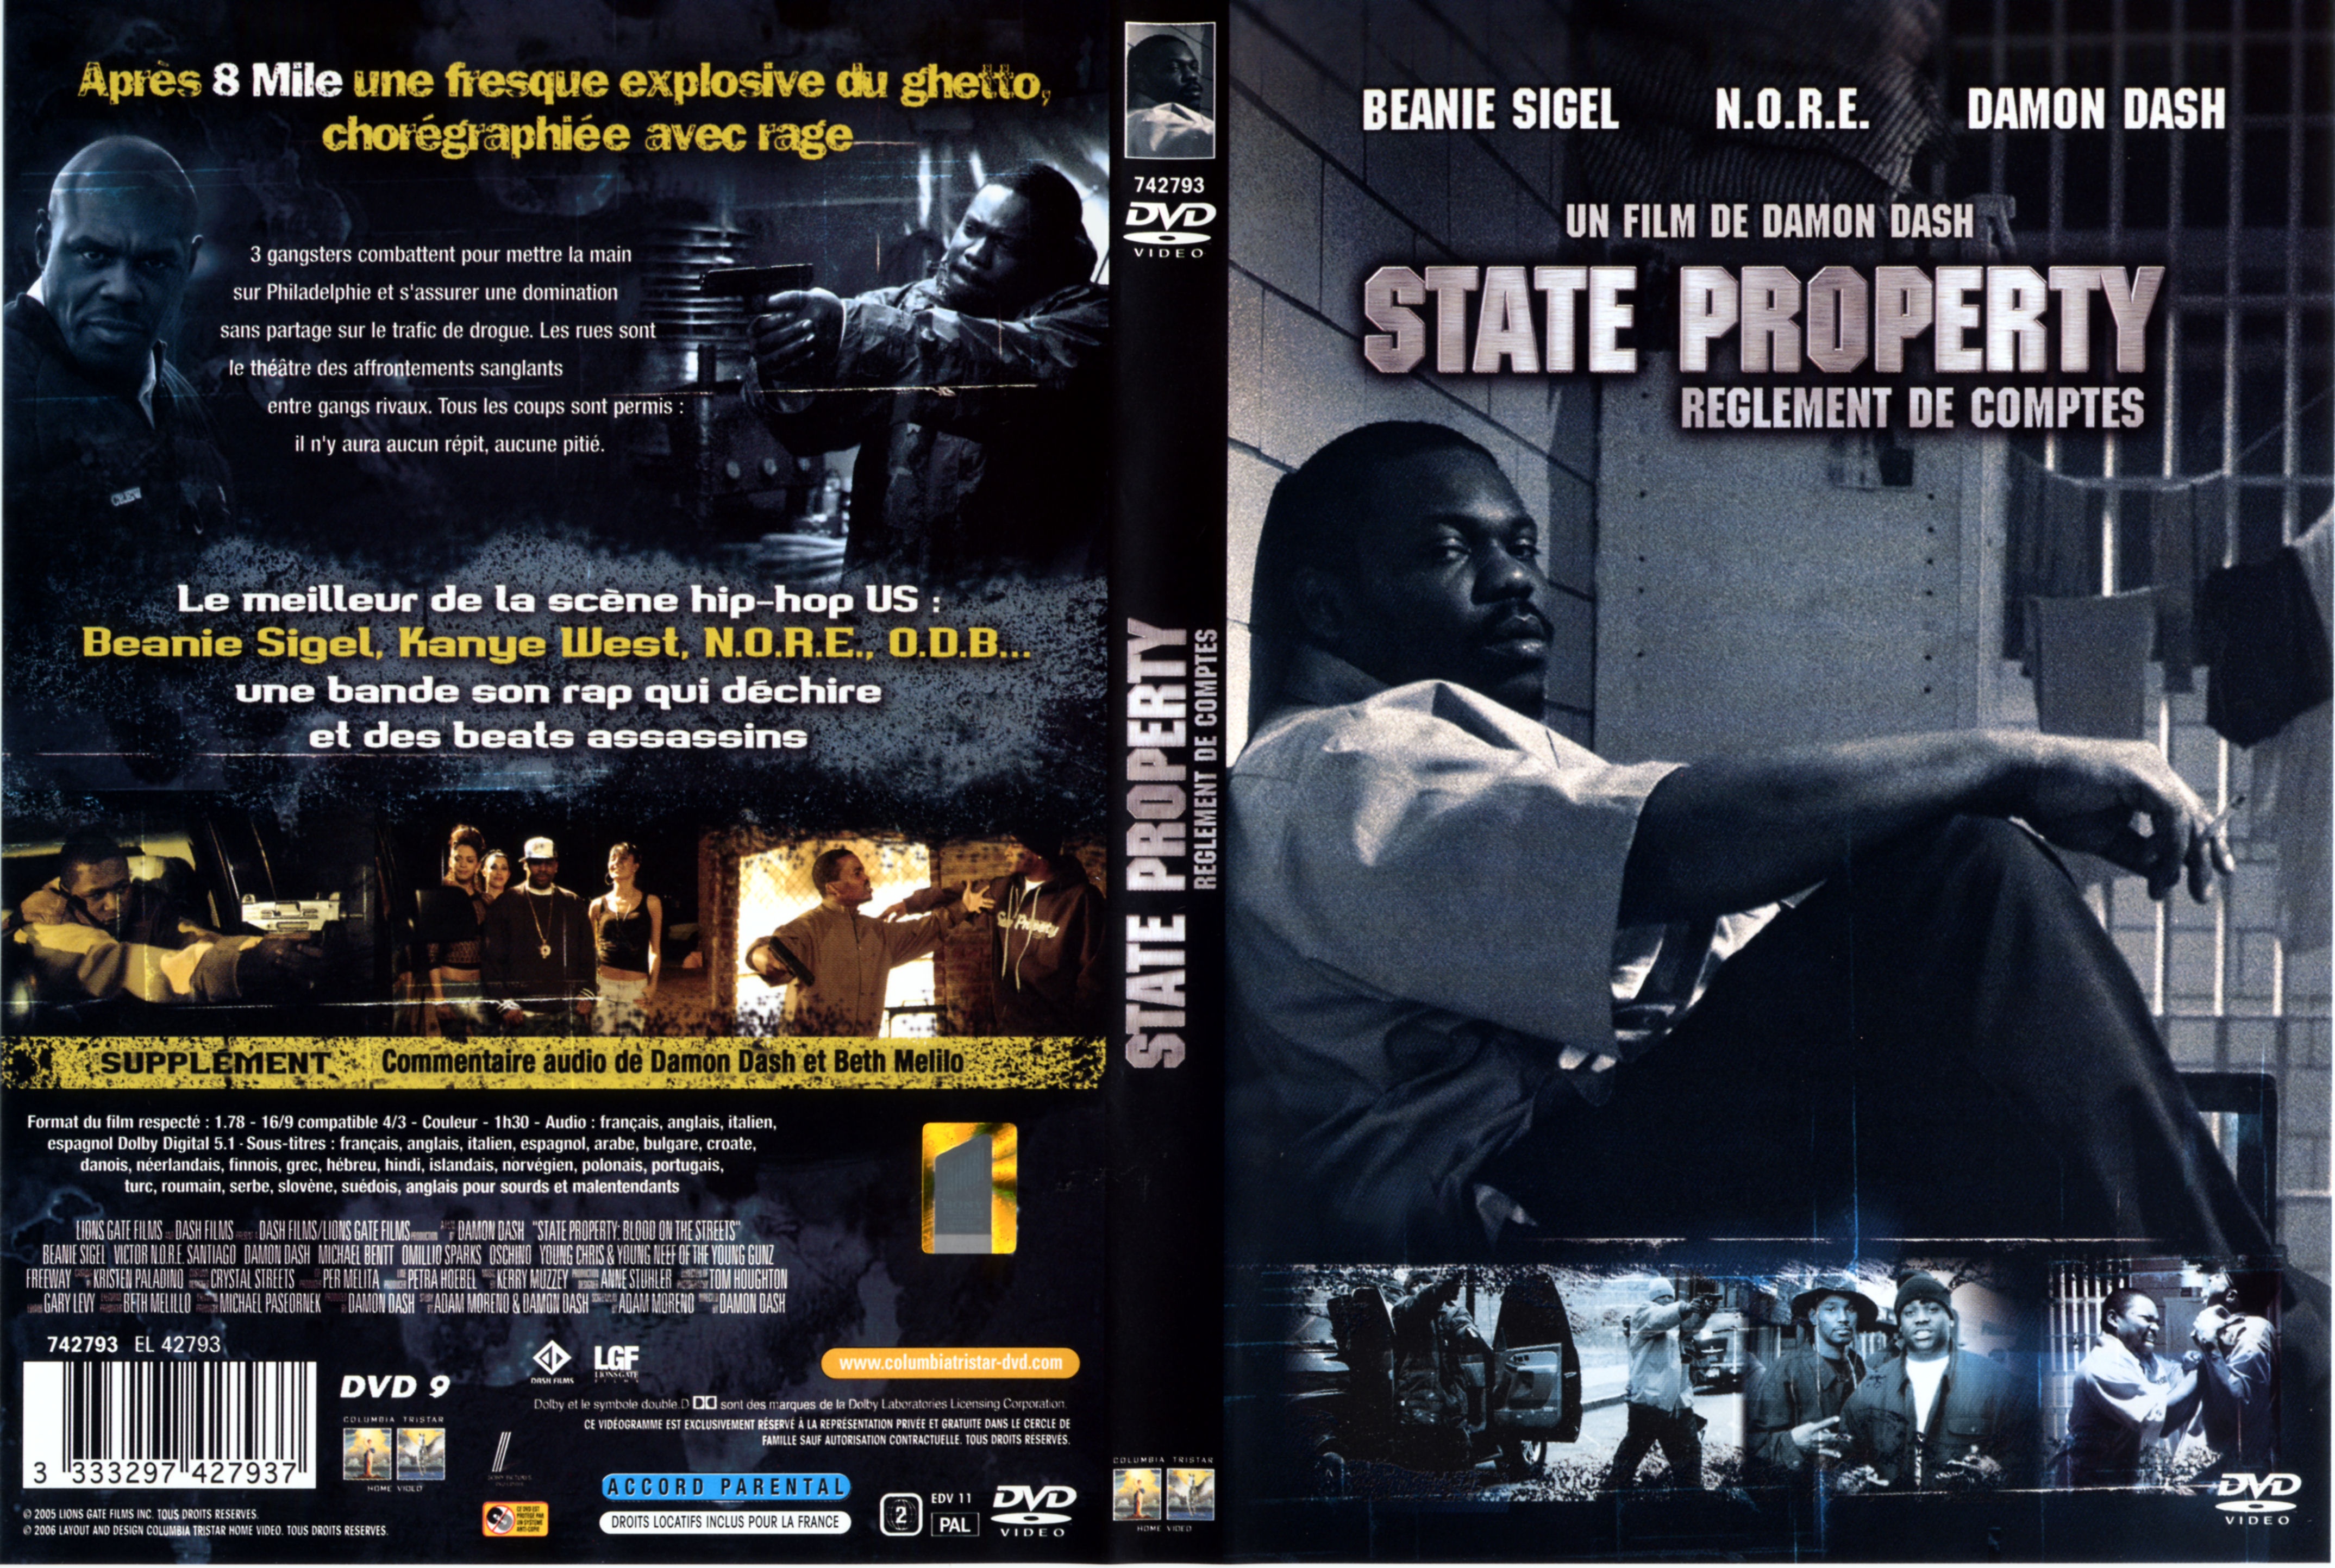 Jaquette DVD State property